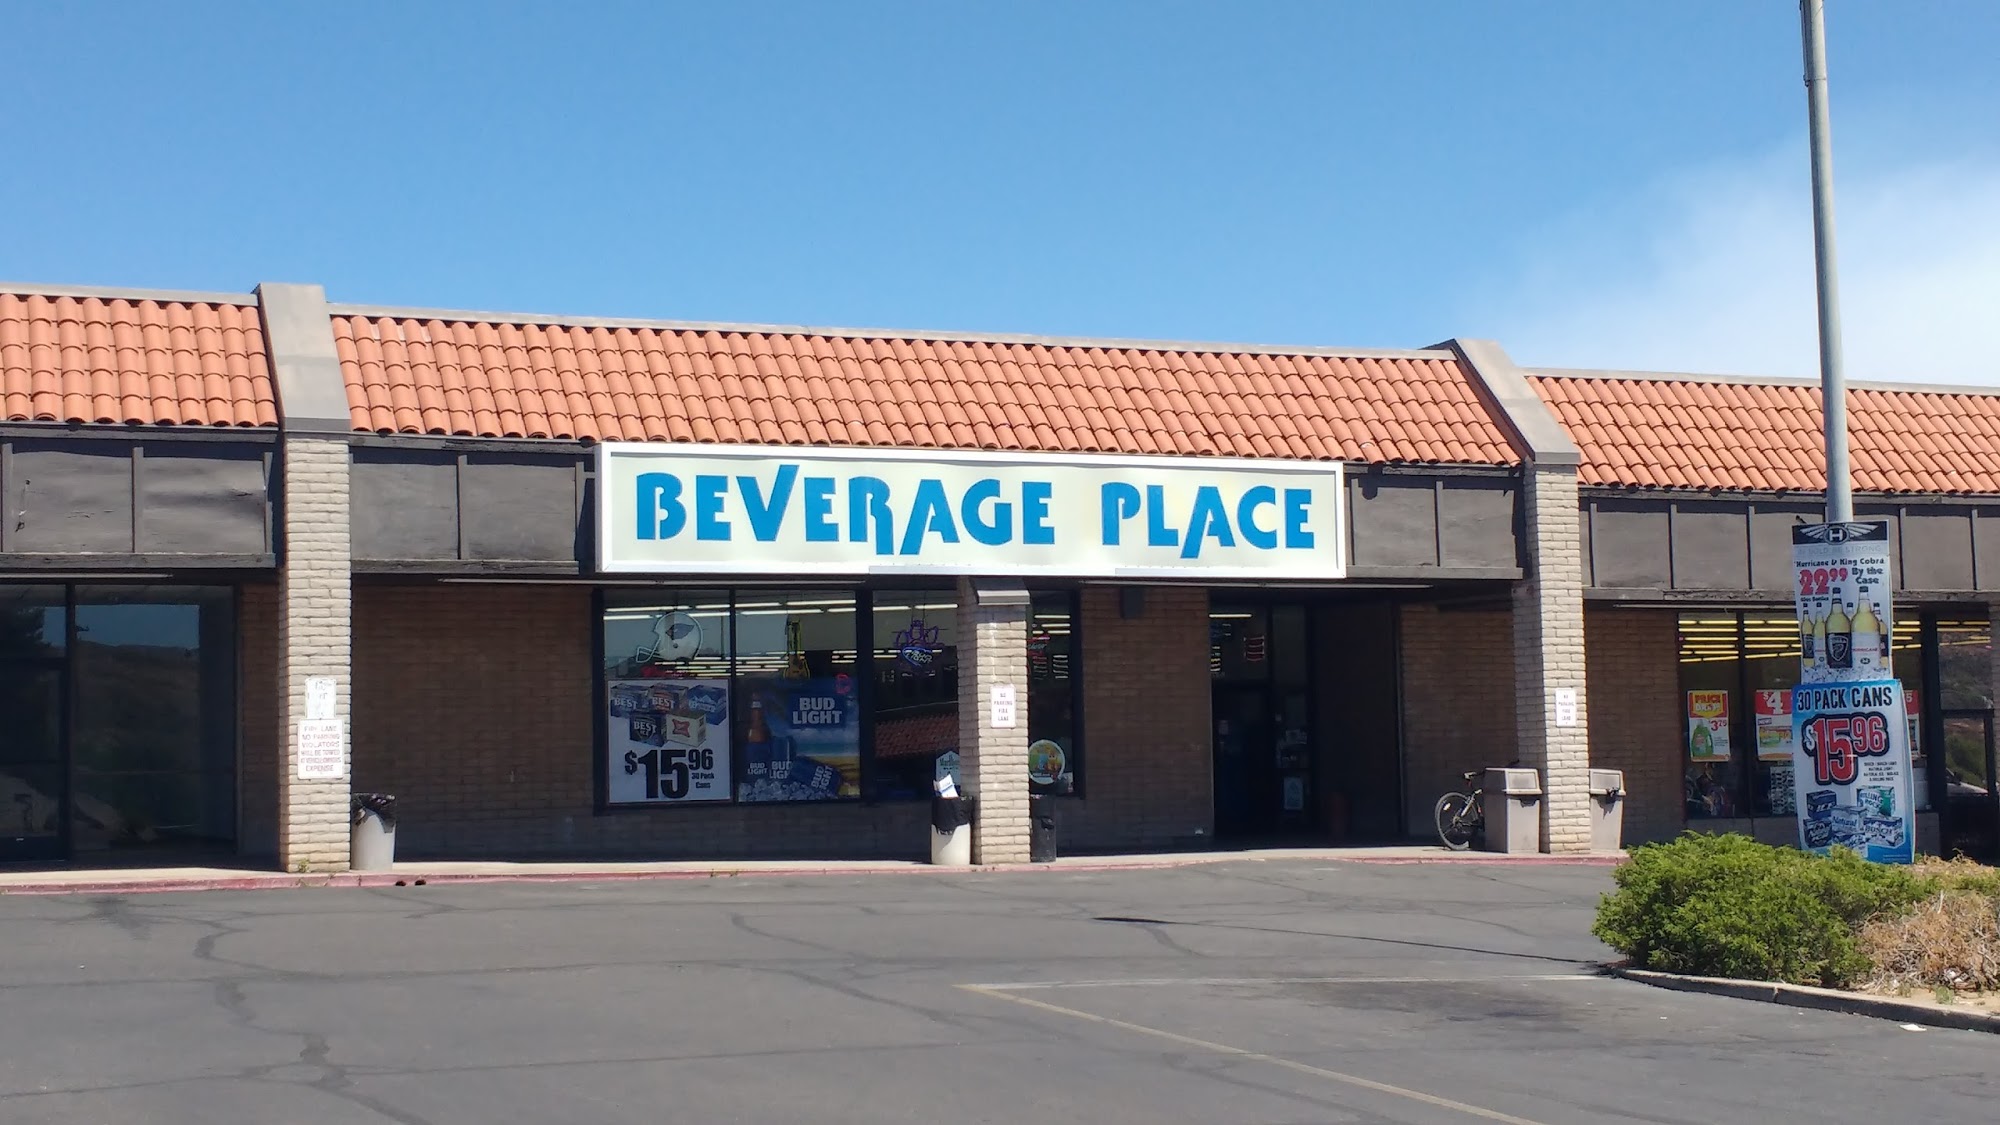 The Beverage Place